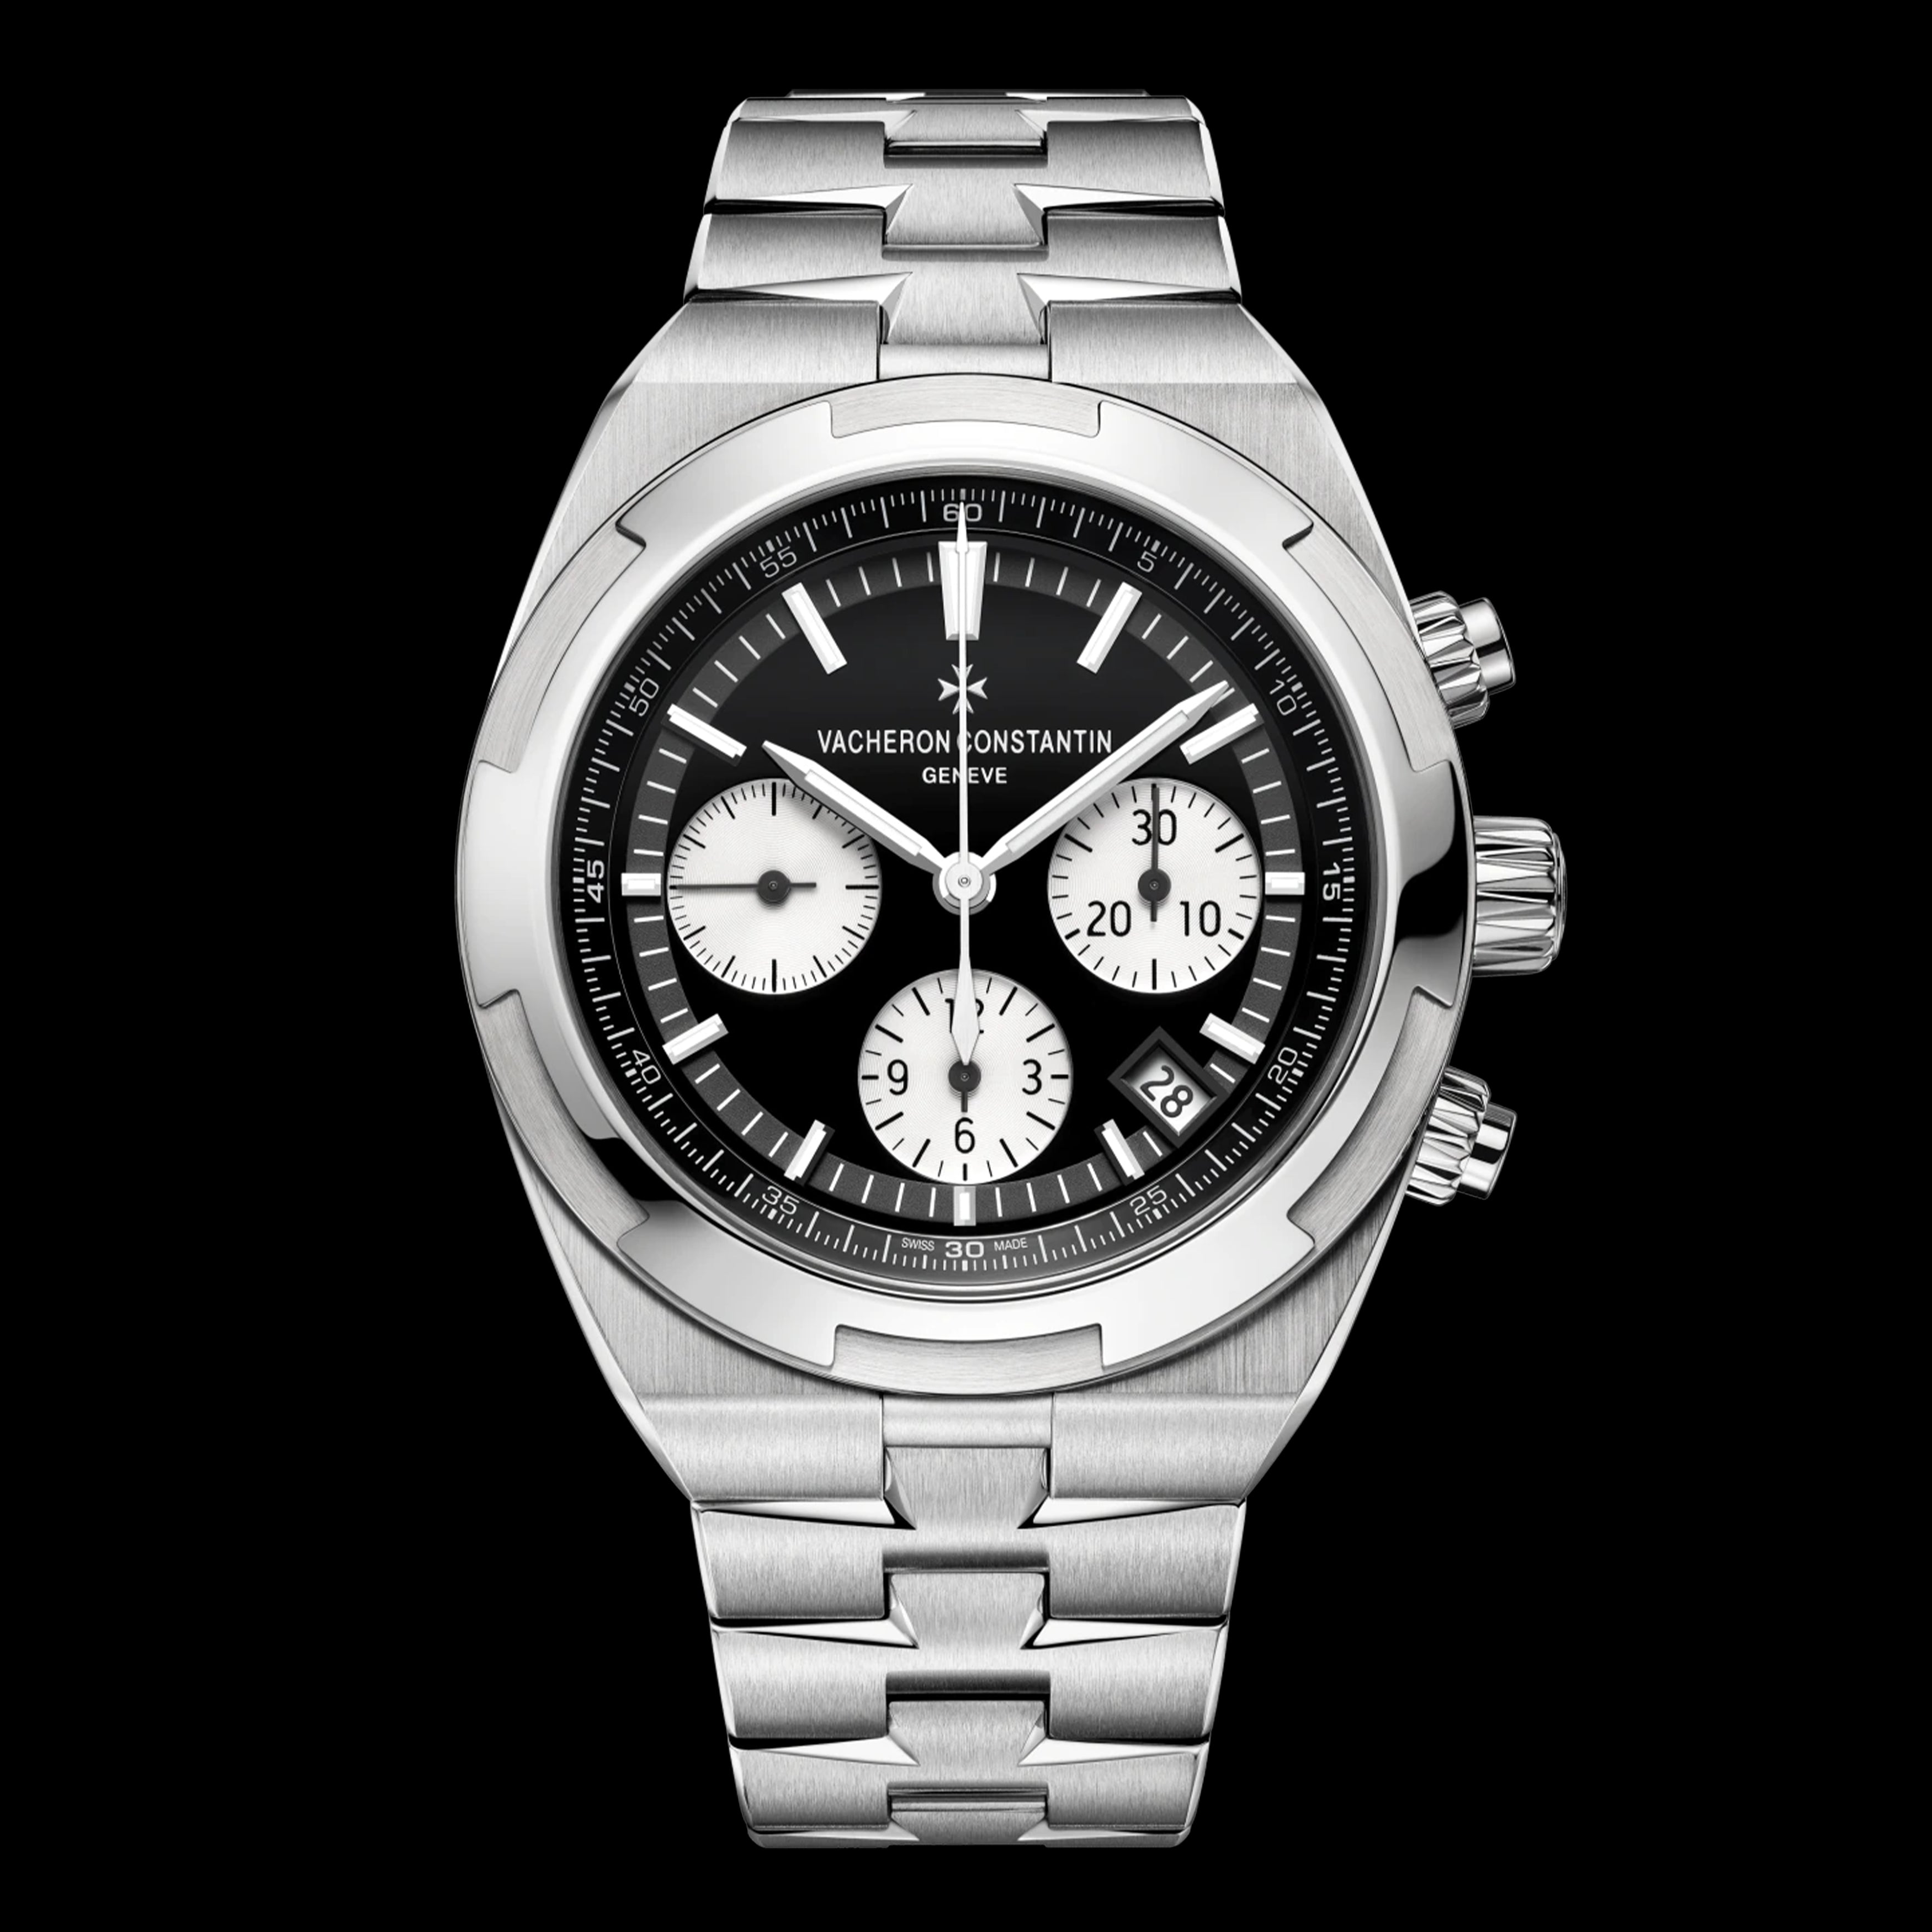 Vacheron Constantin Overseas Chronograph for $44,000 for sale from